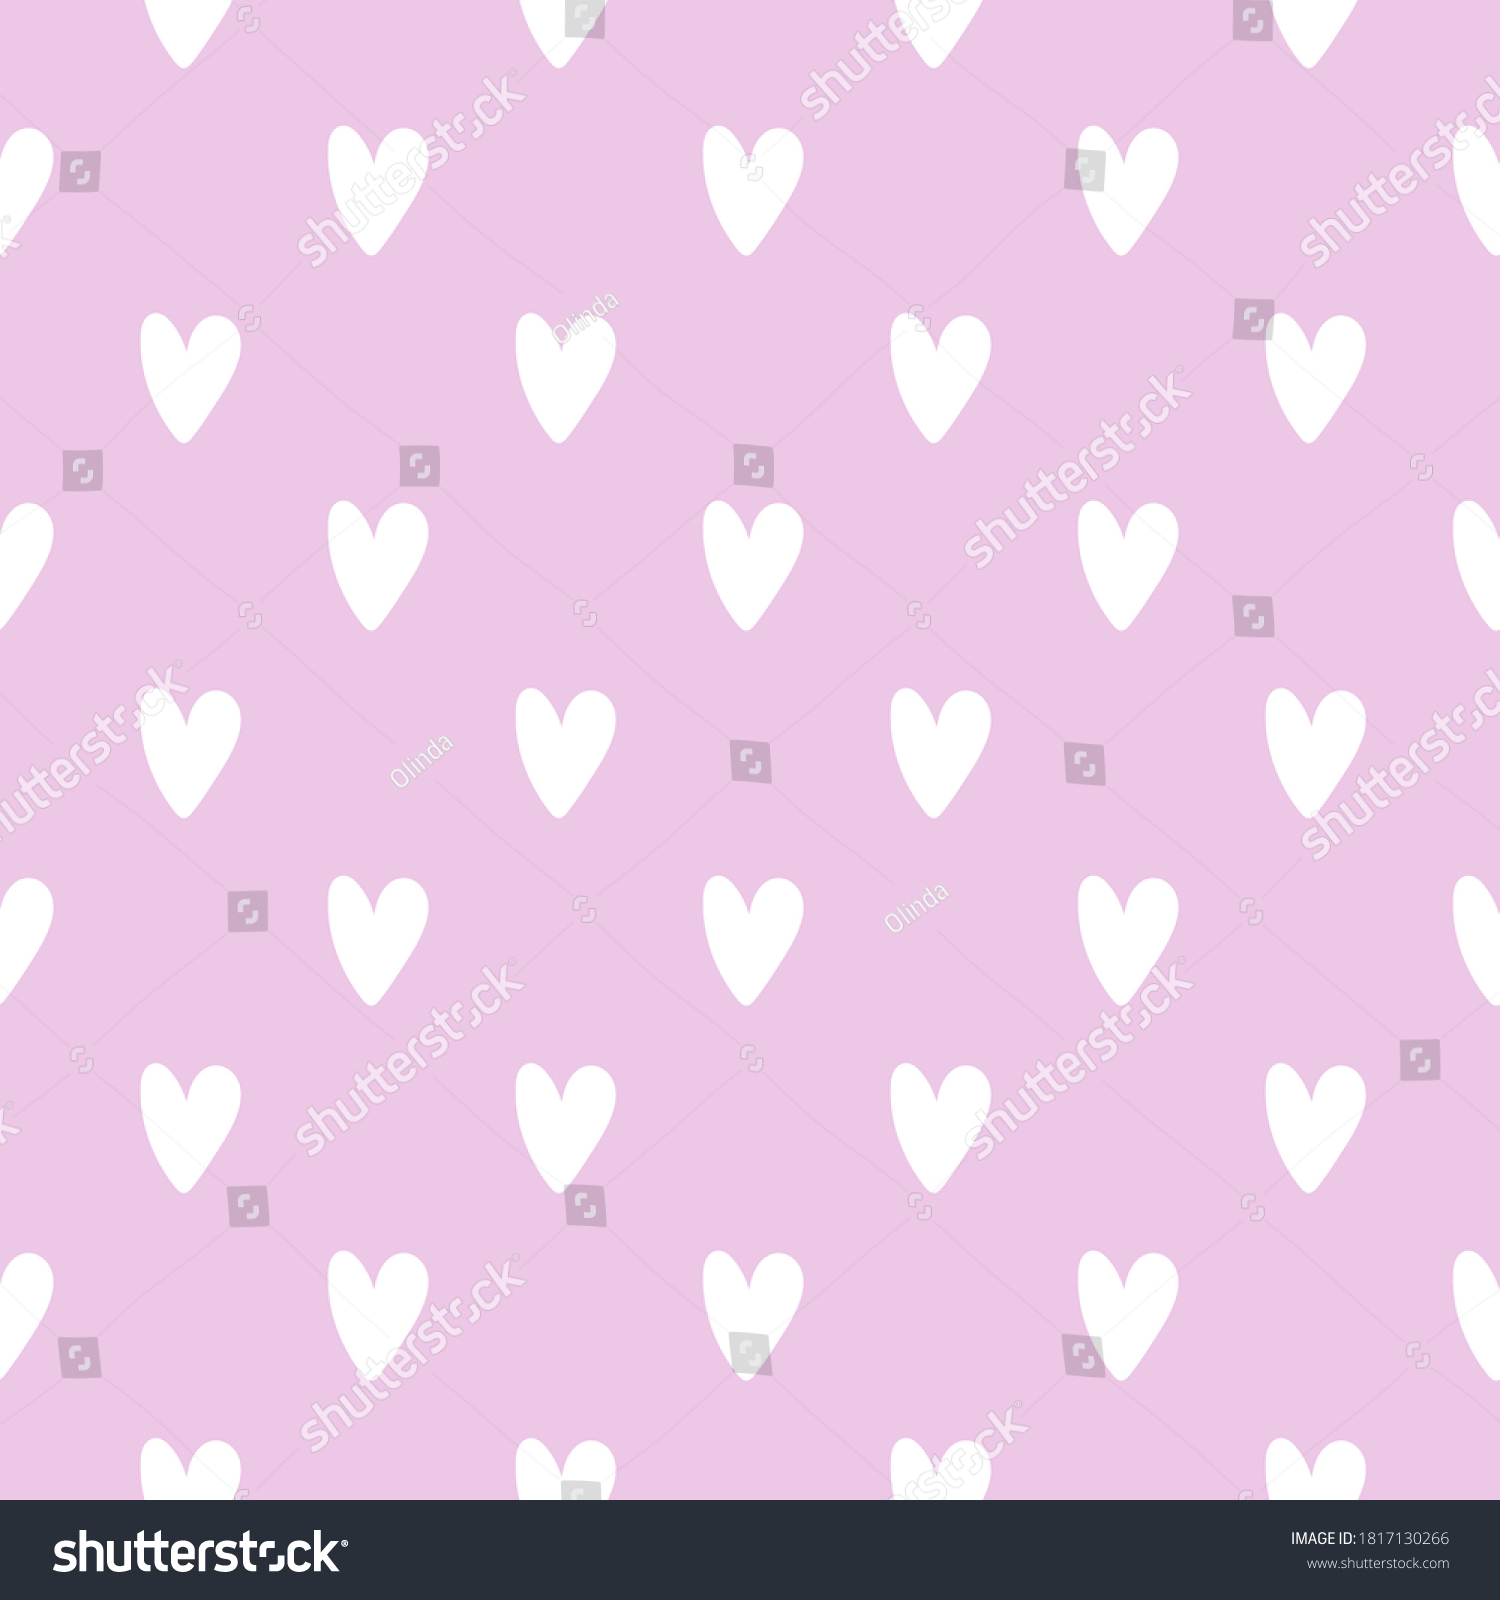 SVG of Seamless pattern white doodle hearts on pastel lavender background. Elegant print for fabric textile gift paper scrapbook wallpaper kids clothes nursery decor svg